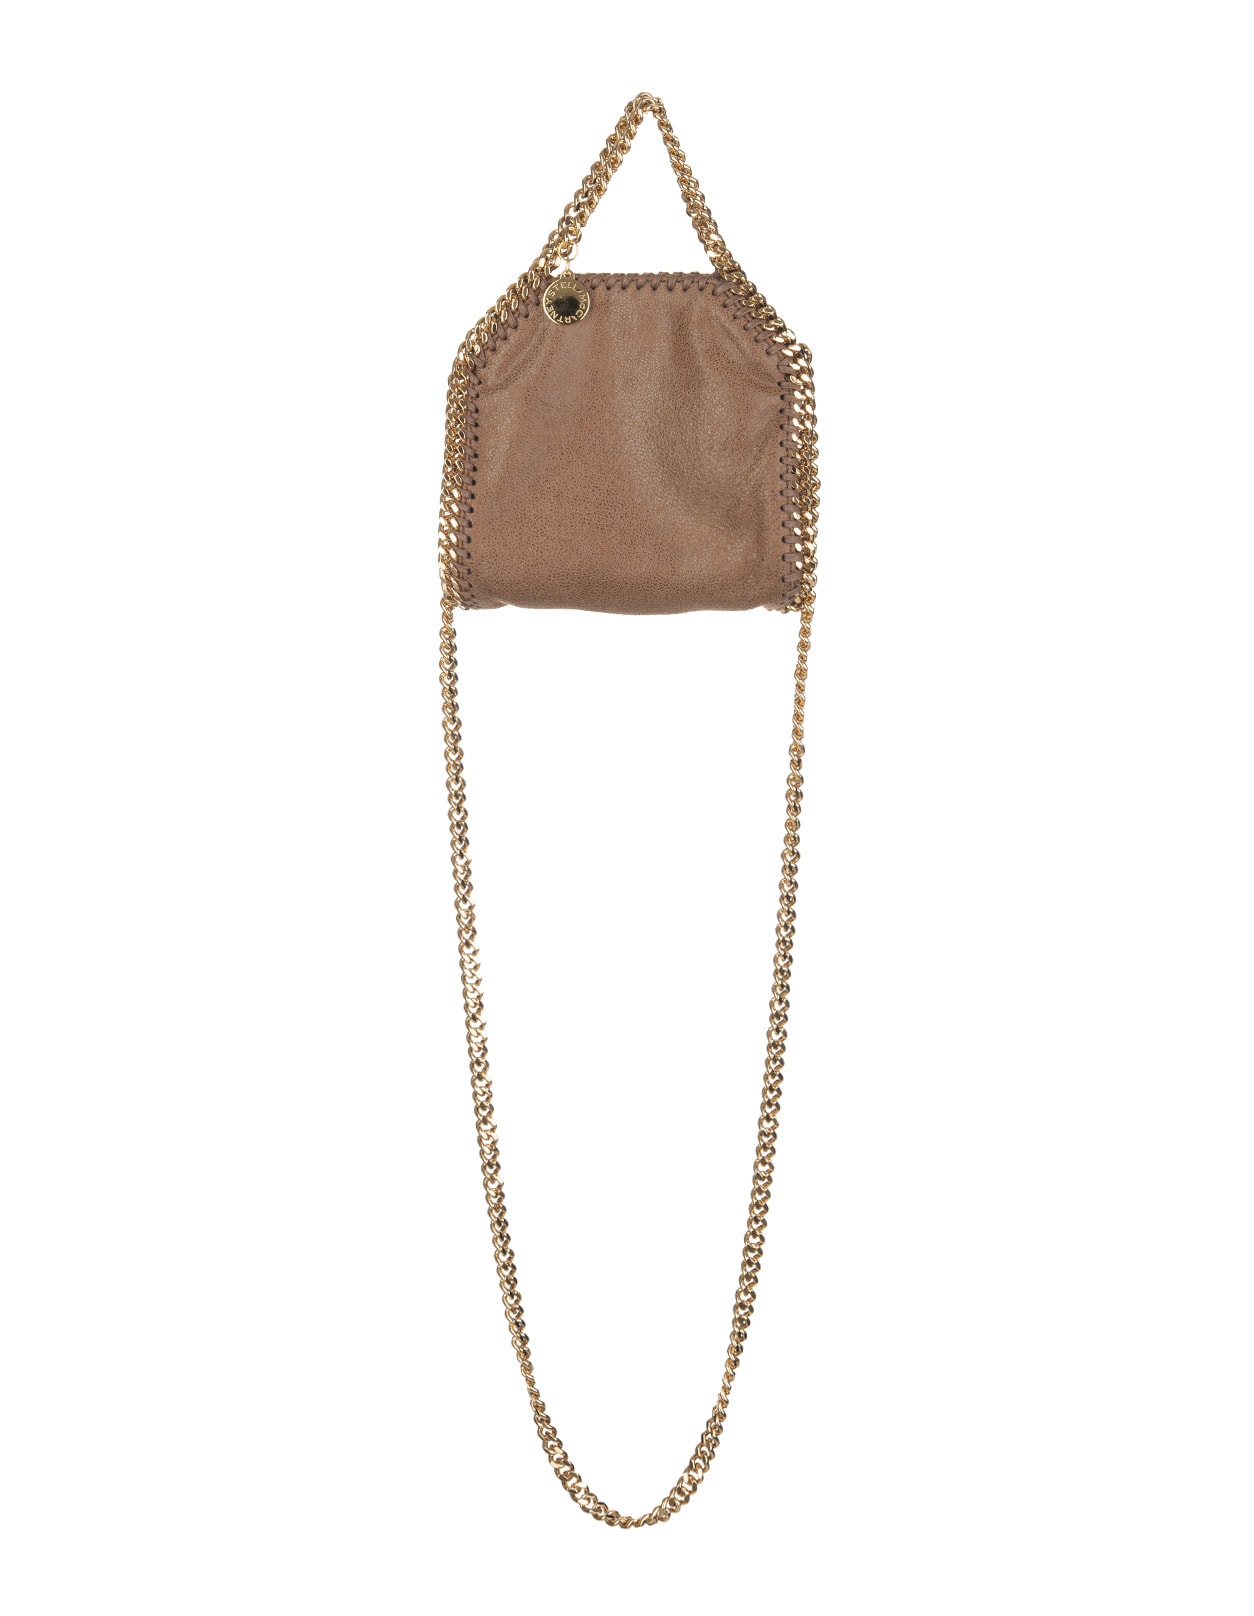 Stella McCartney Brown And Golden Tiny Falabella Fold Over Bag